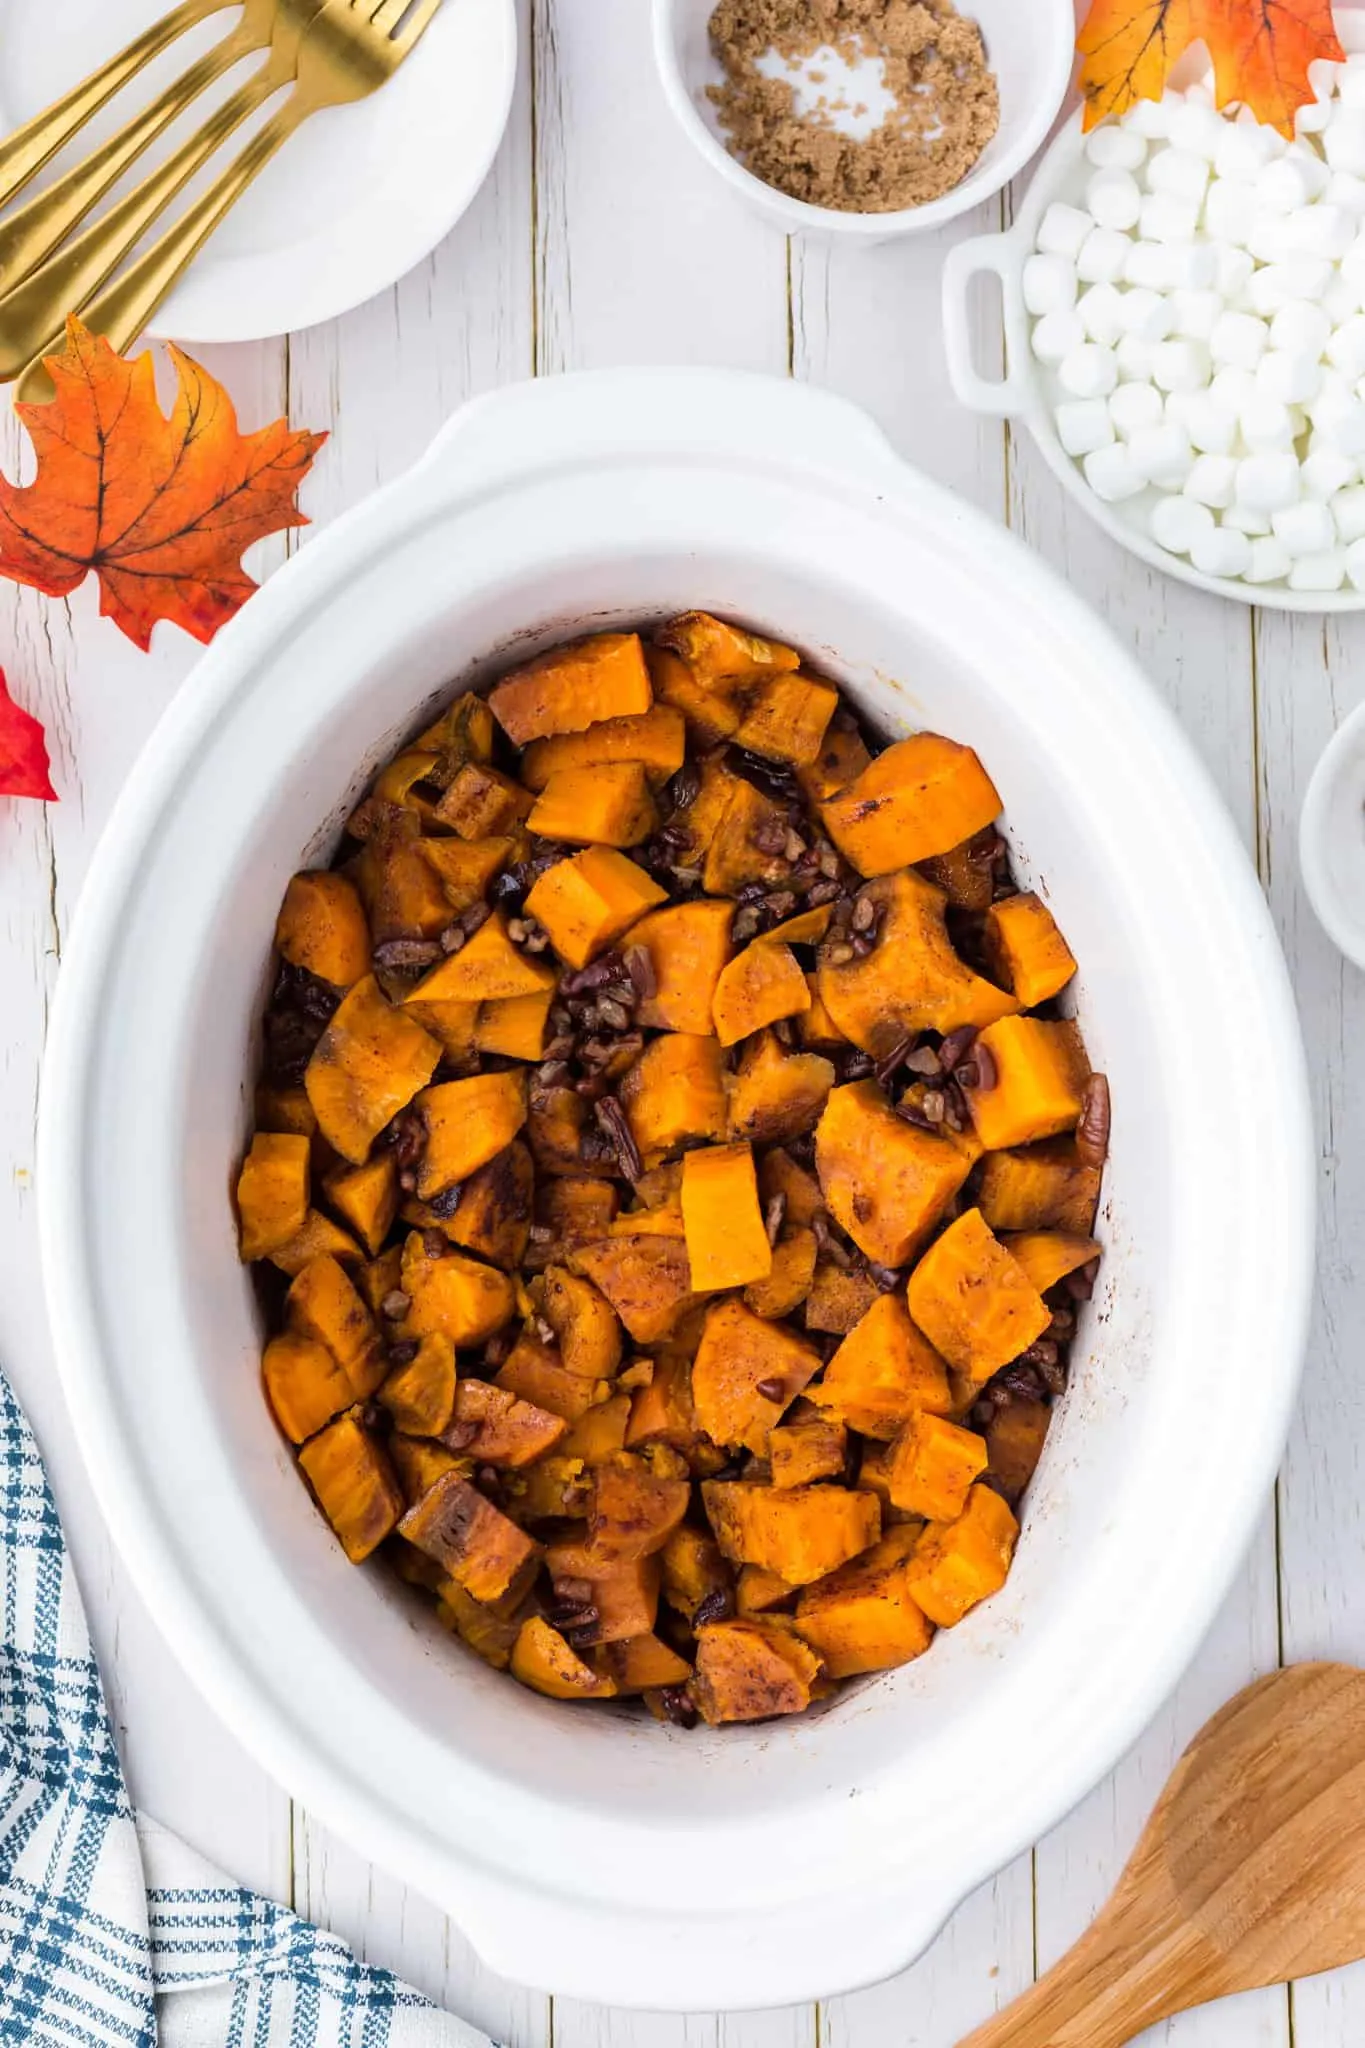 cubed sweet potatoes after cooking in a slow cooker